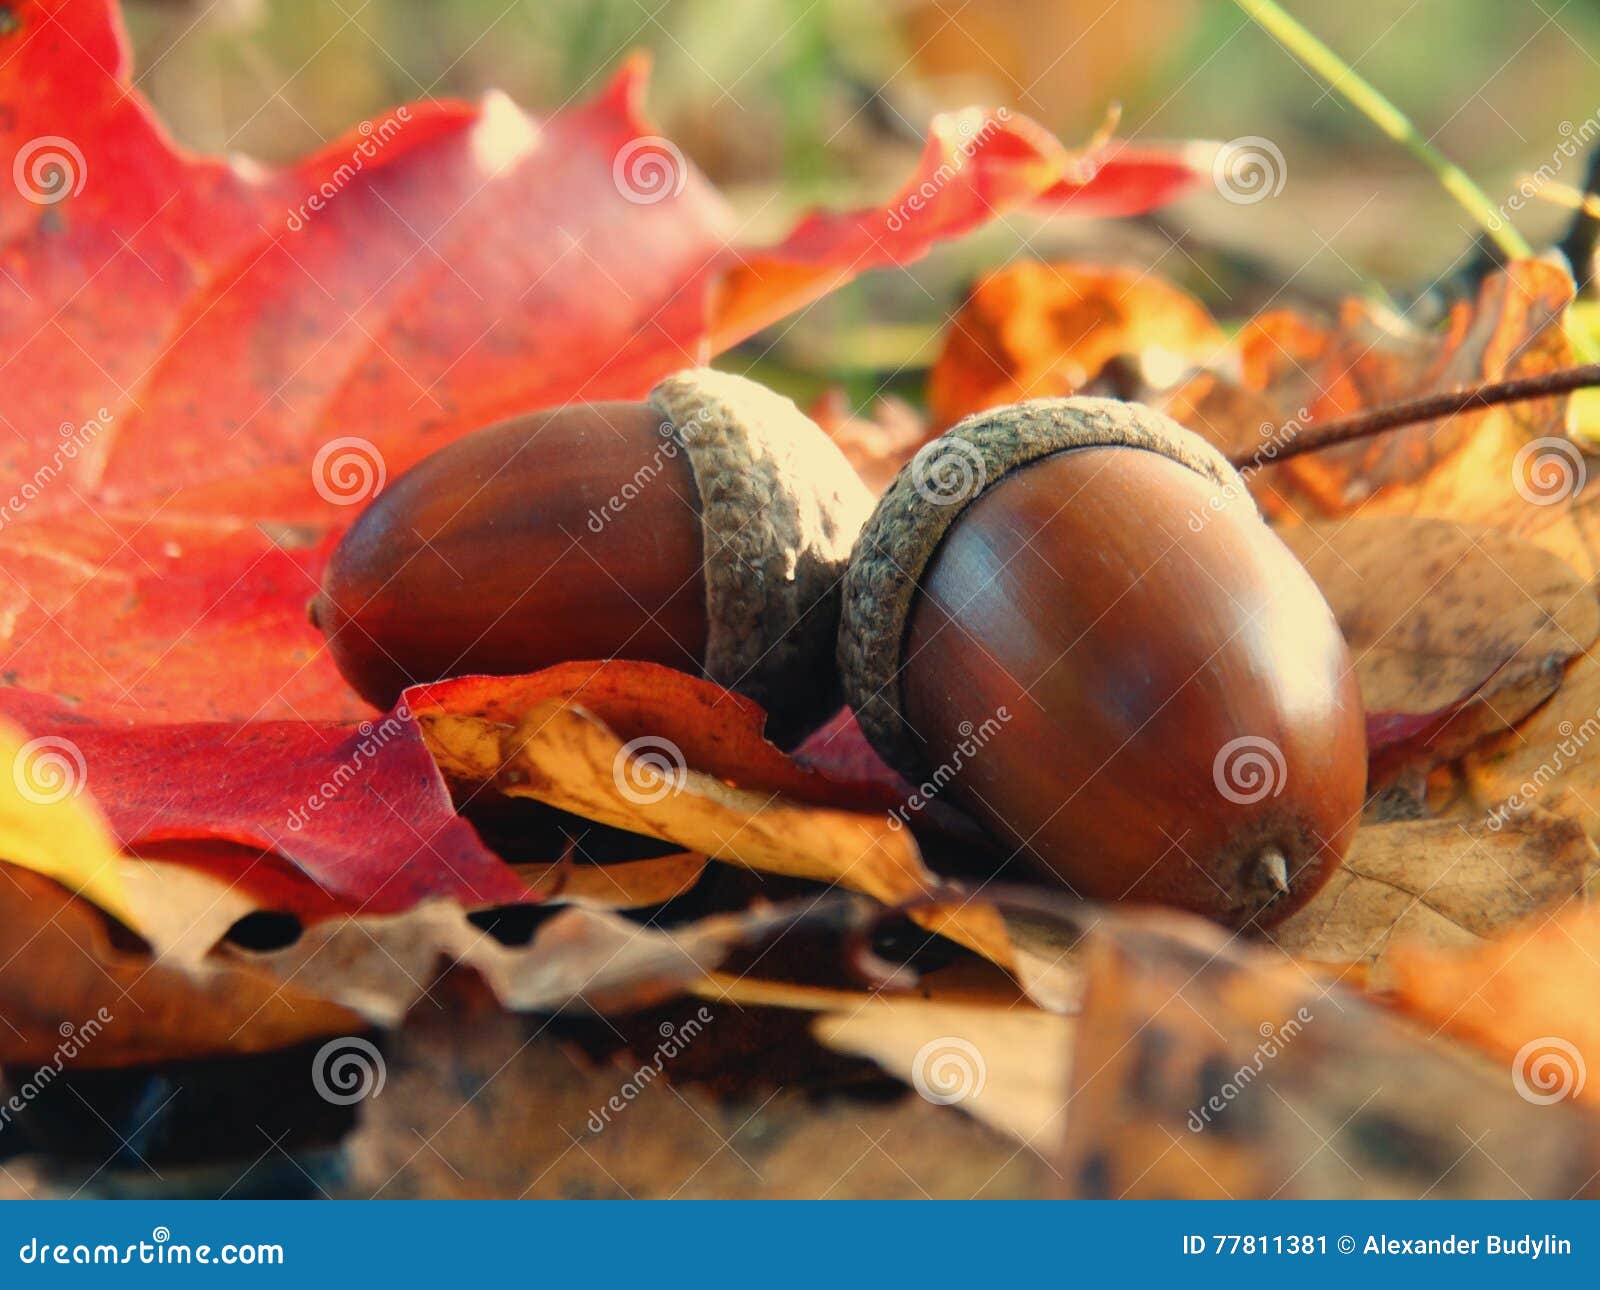 acorns in the forest